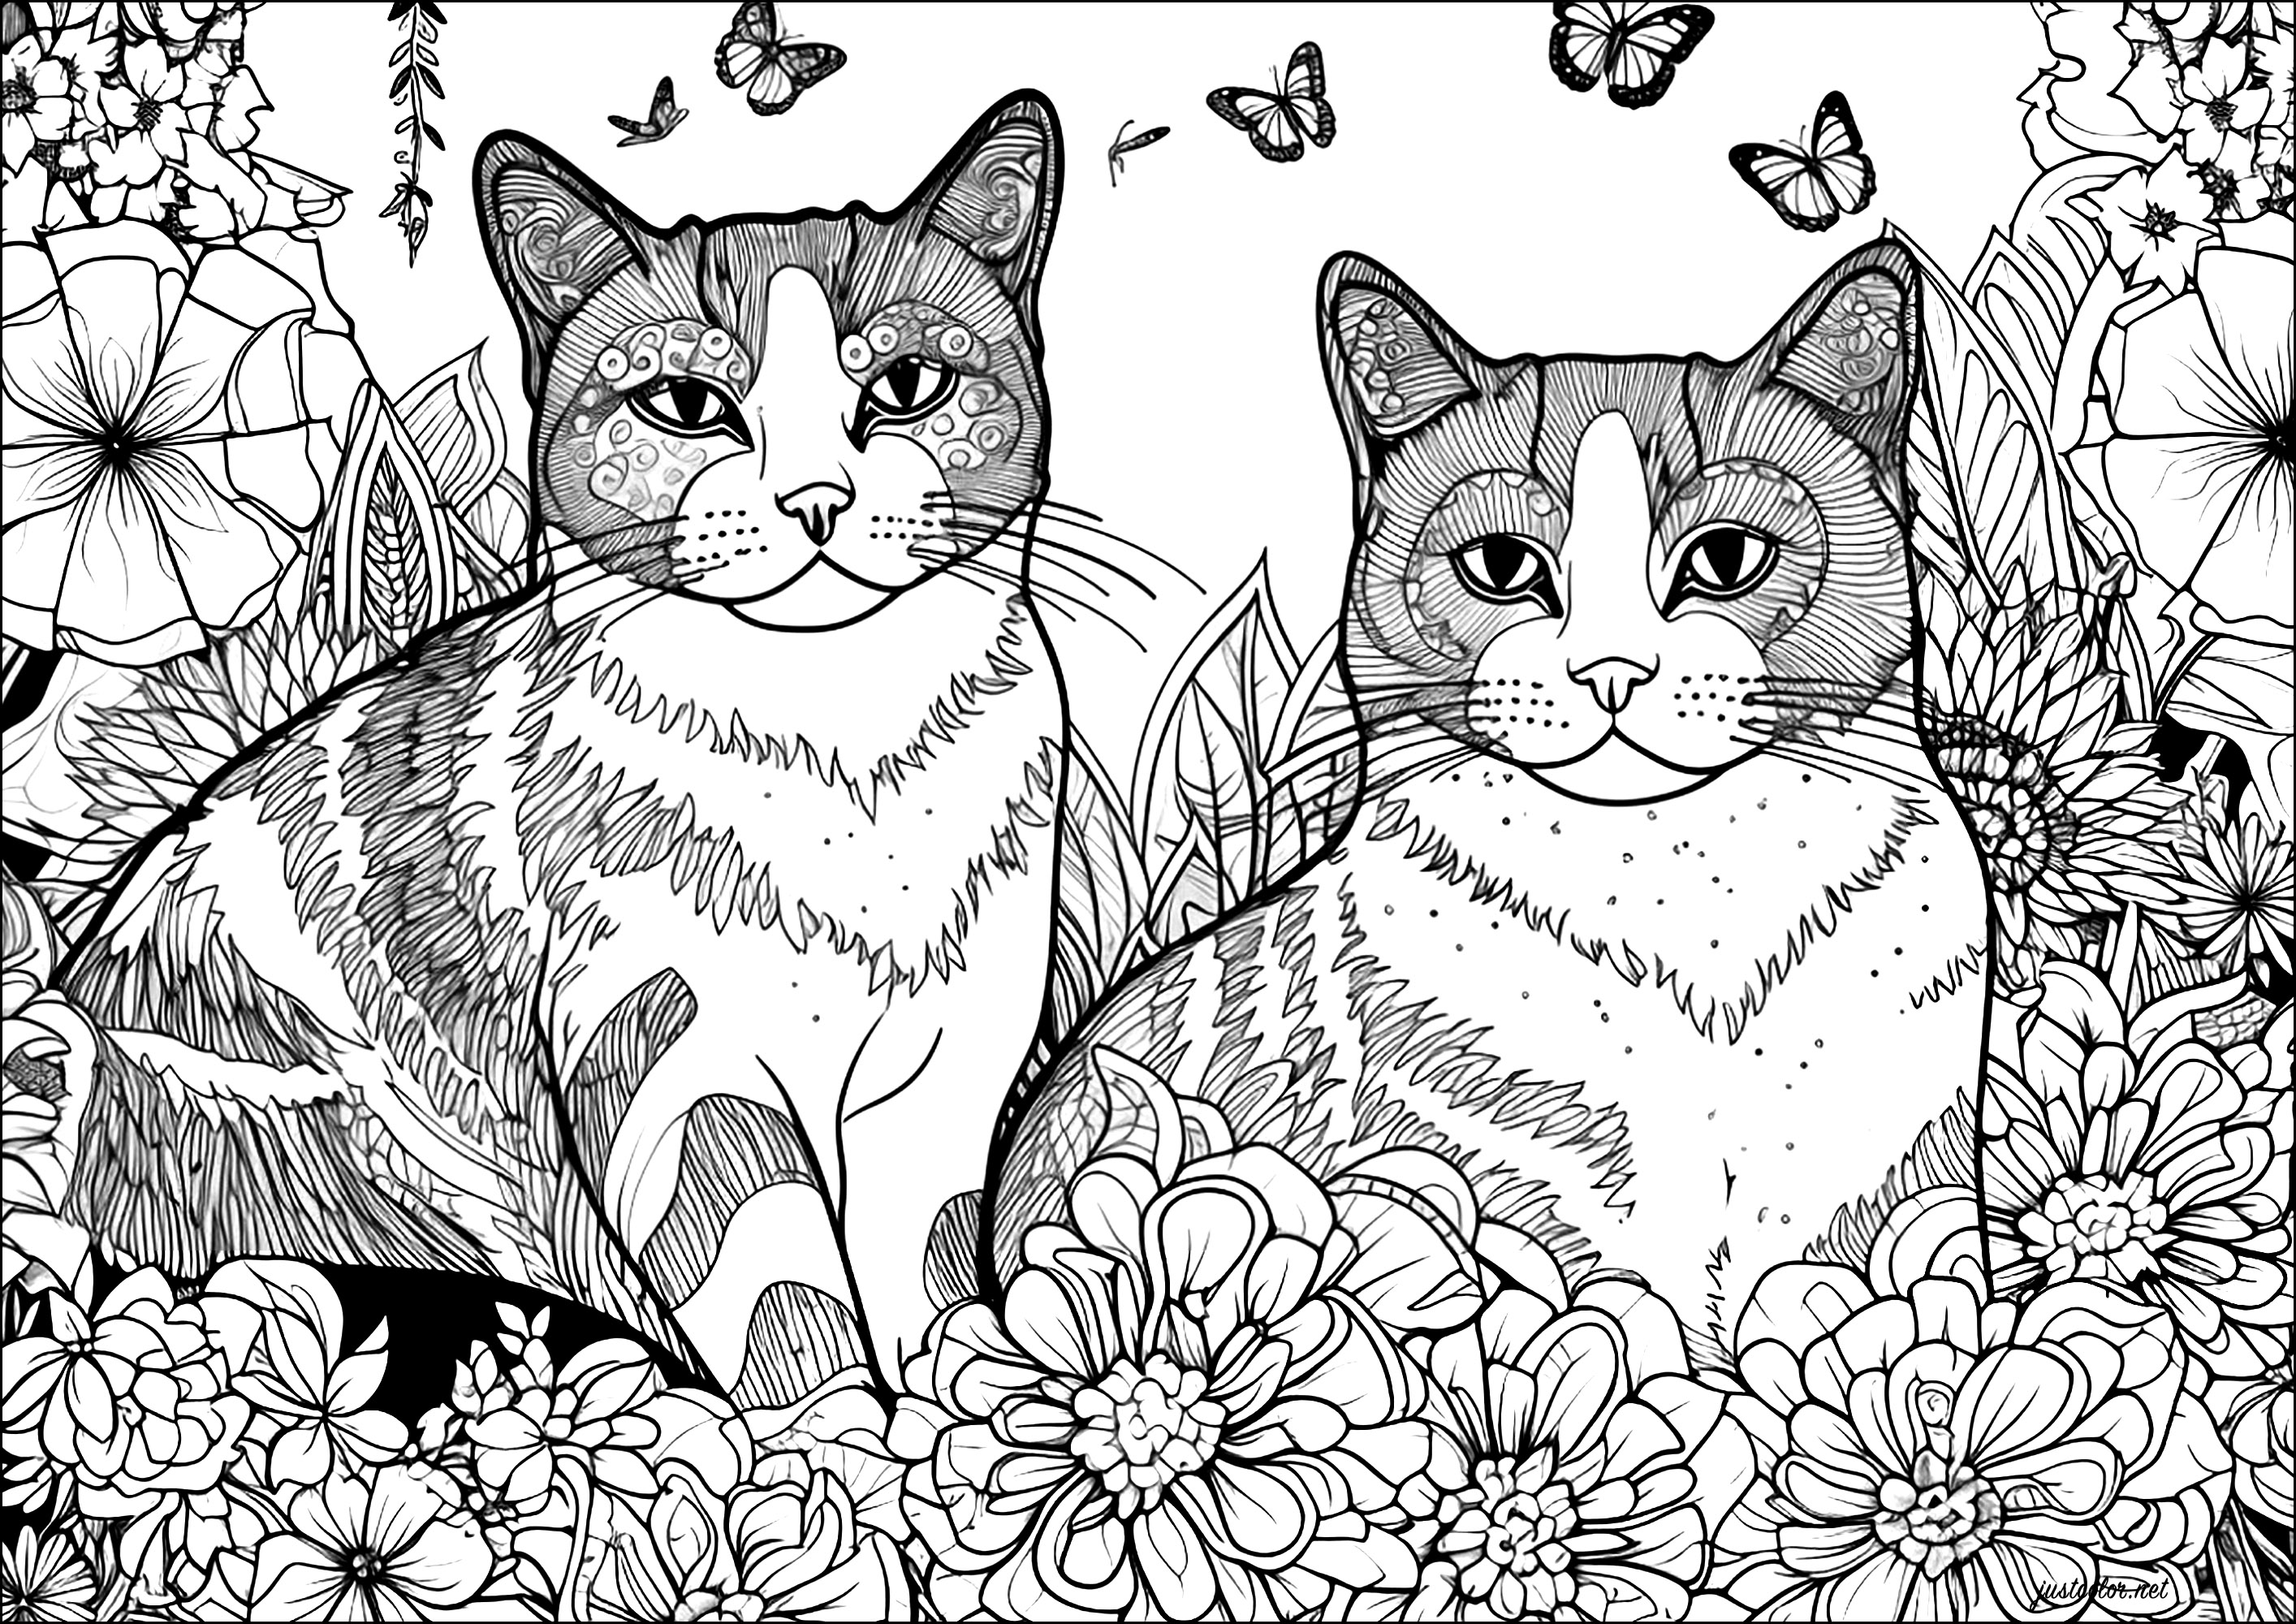 Two cats with flowers and butterflies. A complex design full of pretty details